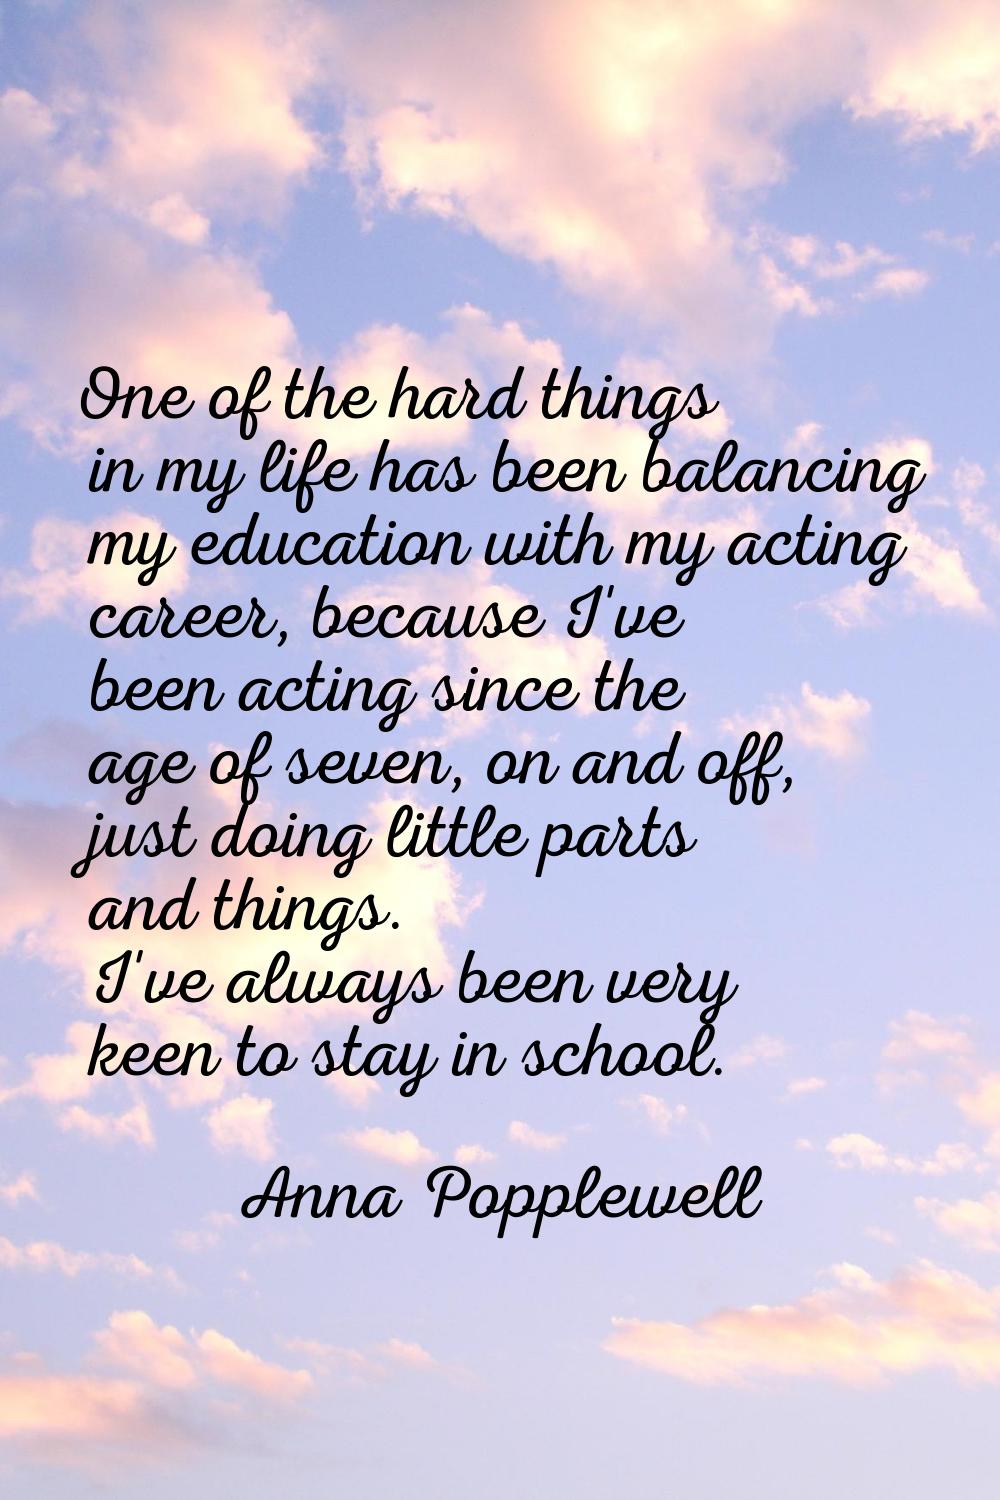 One of the hard things in my life has been balancing my education with my acting career, because I'